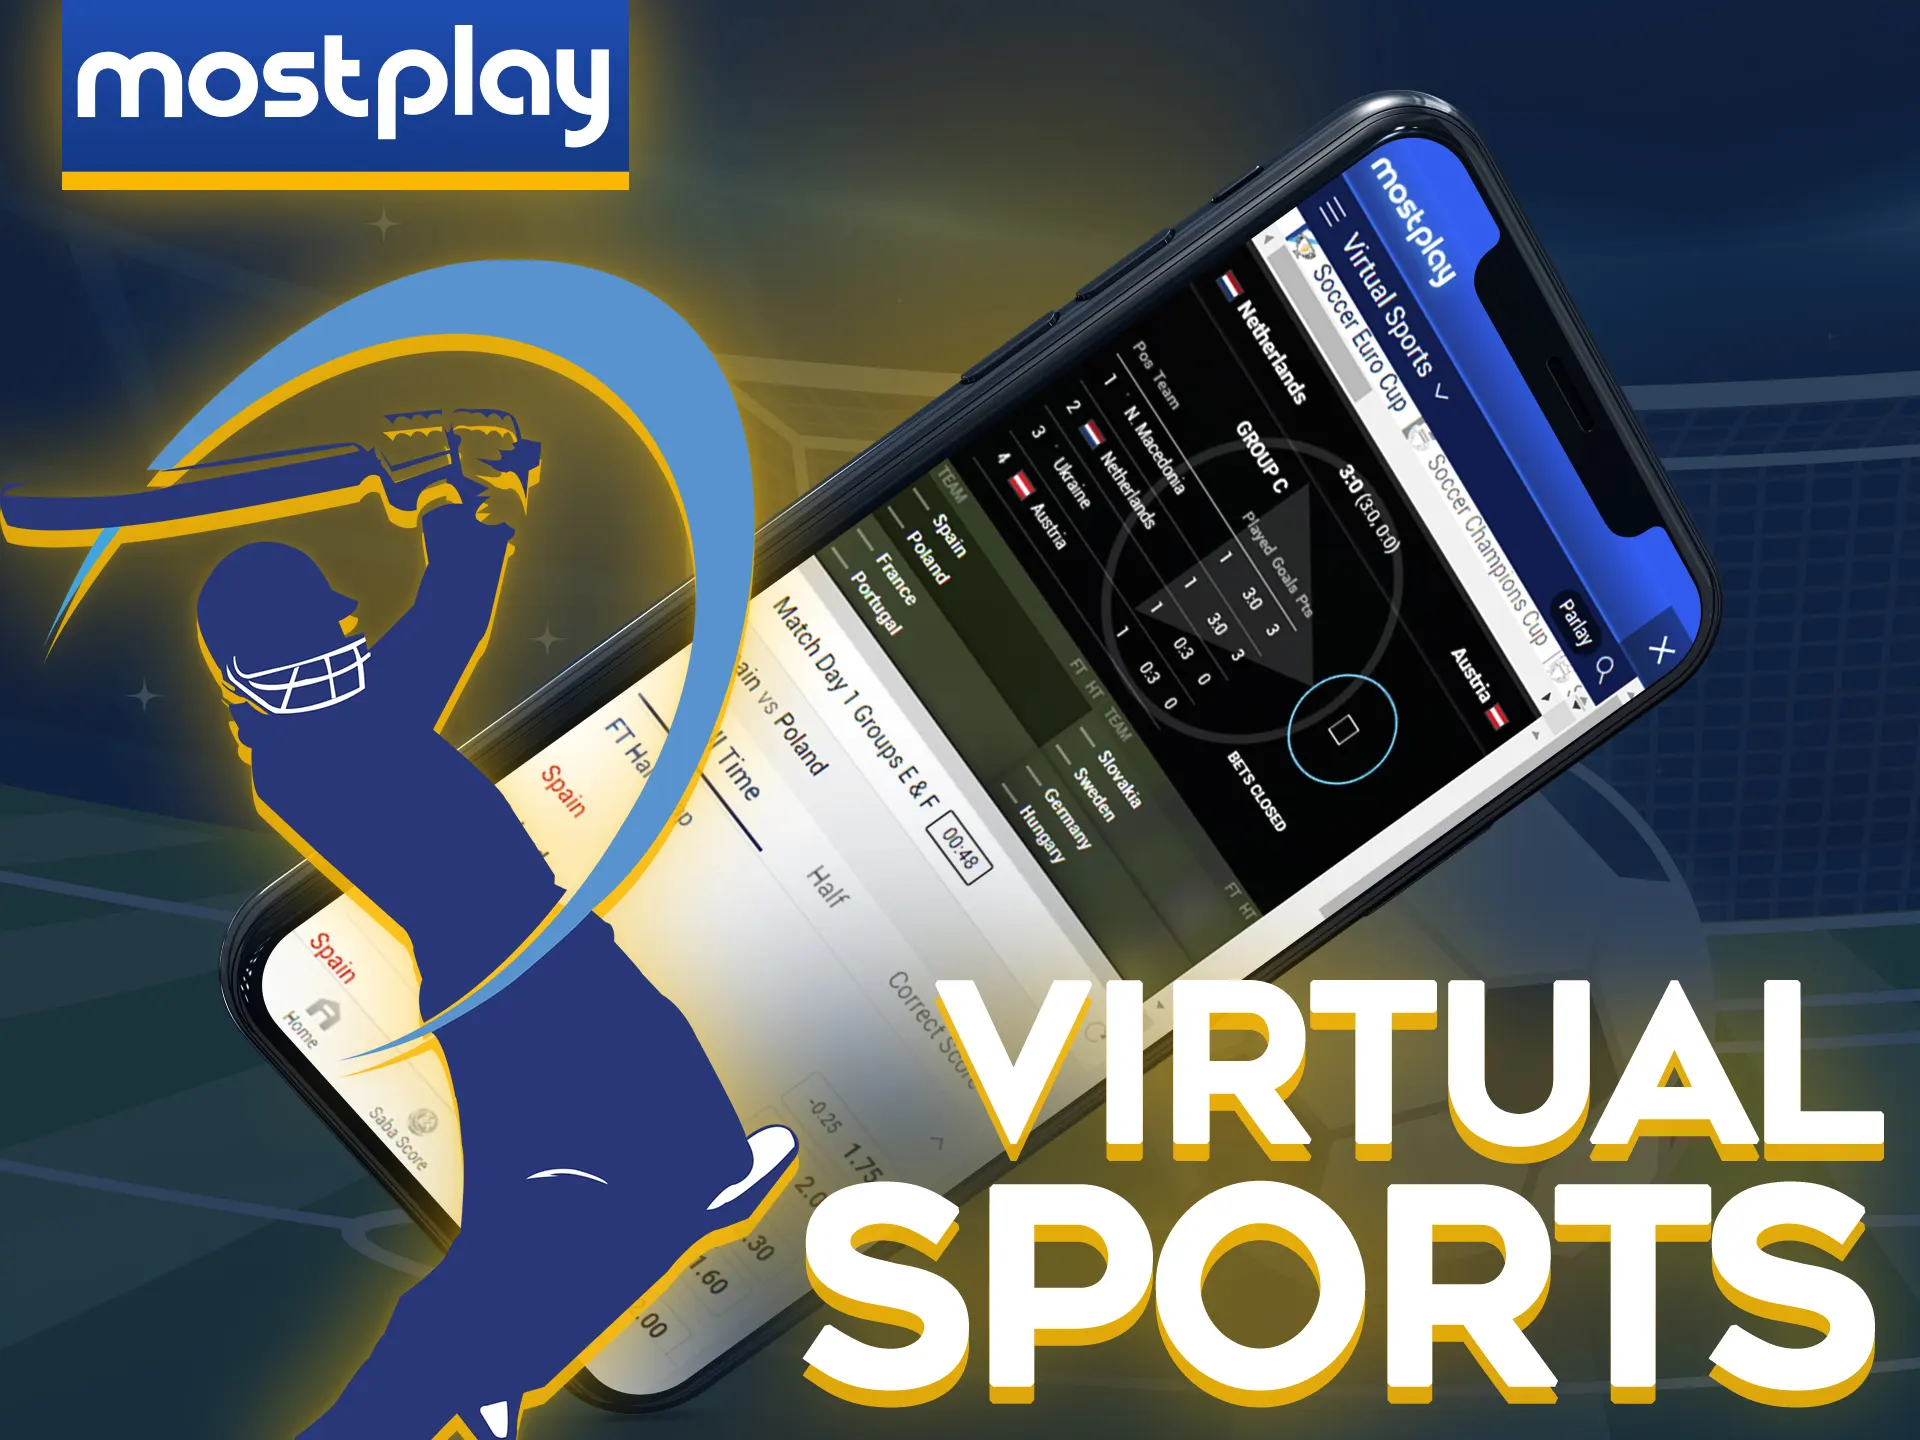 Bet on a variety of virtual sports in the Mostplay app.